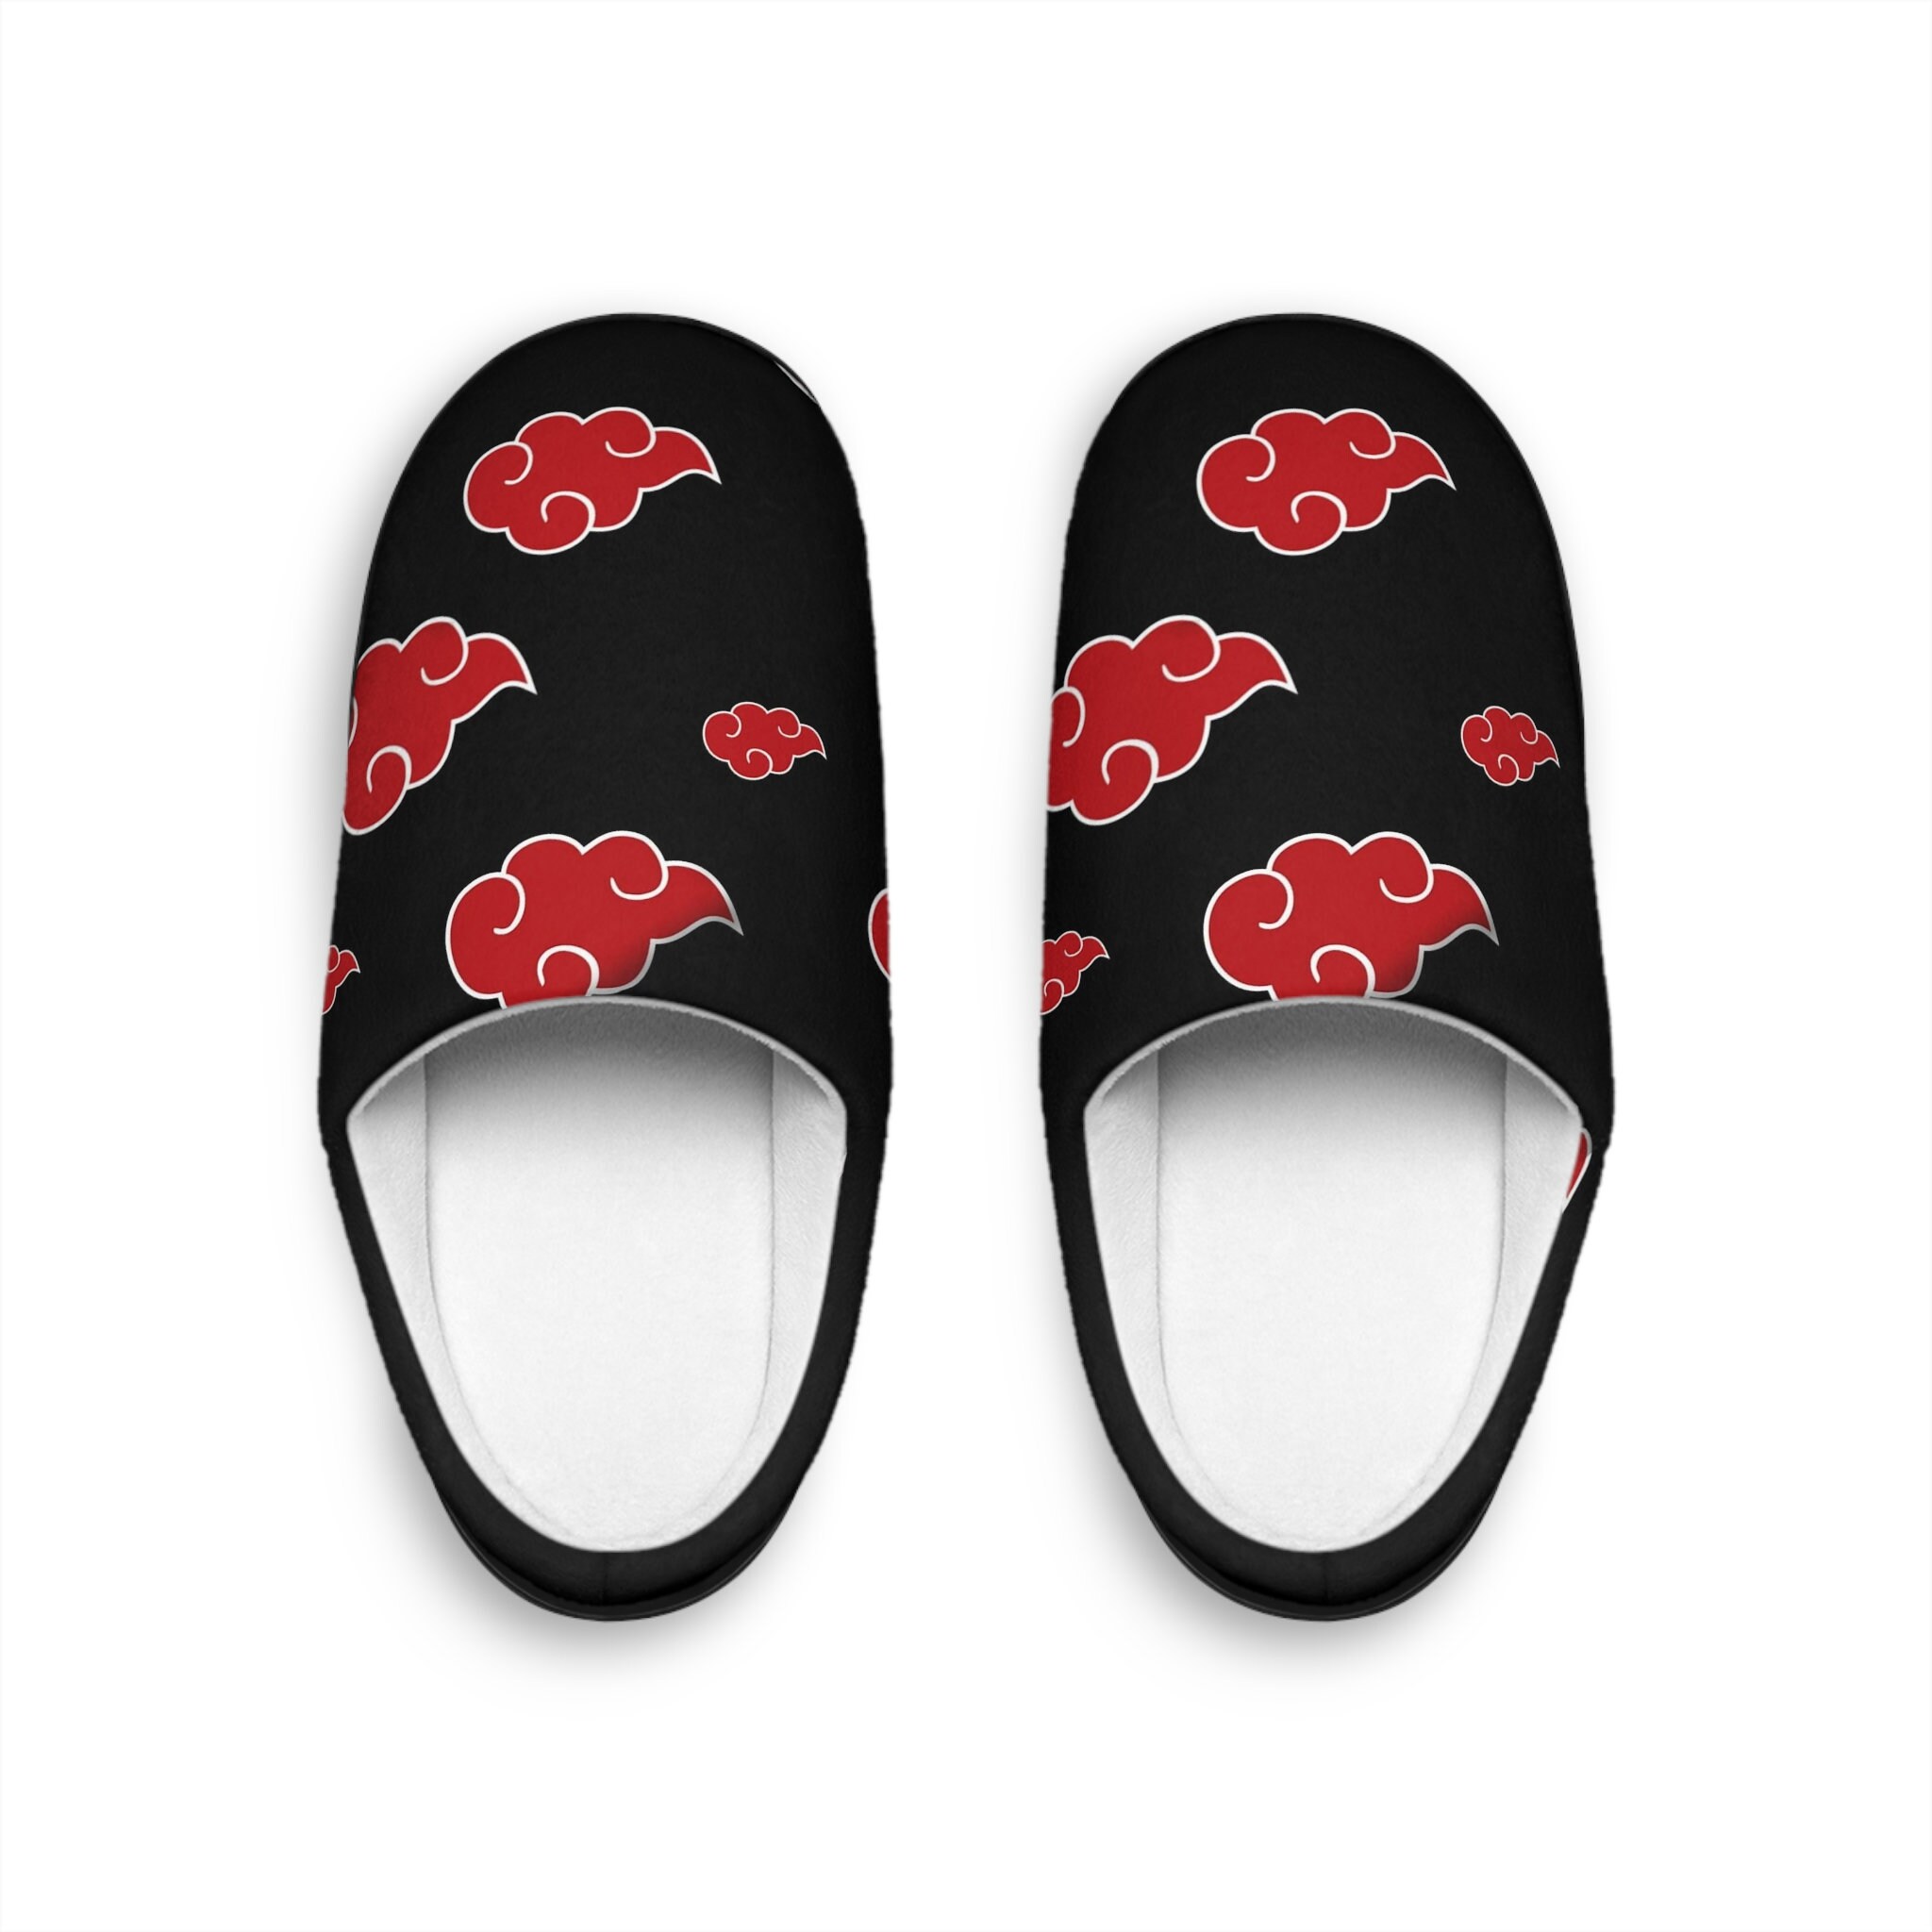  CRAZY LADY Cloud Slippers for Women and Men Indoor